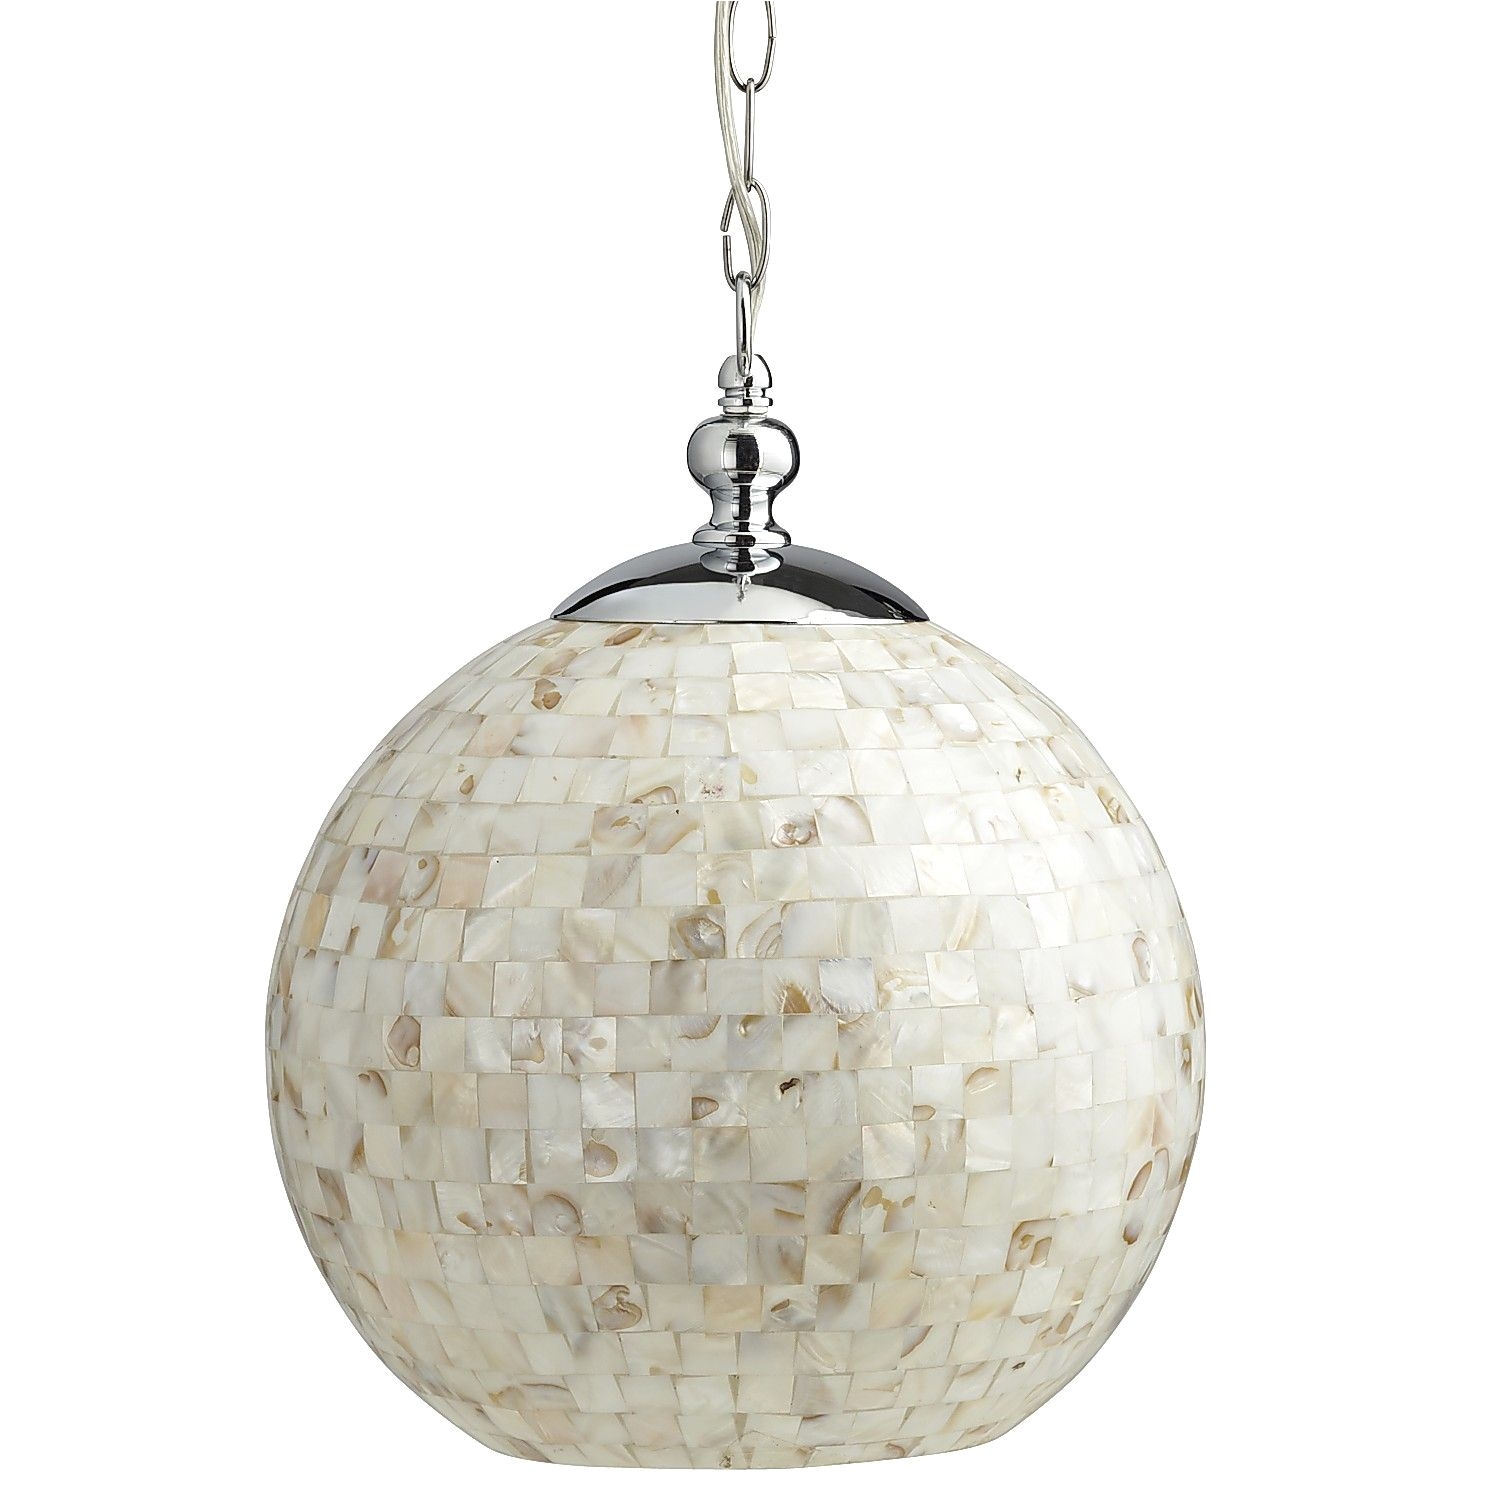 pier 1 mother of pearl hanging lamp is contemporary and elegant